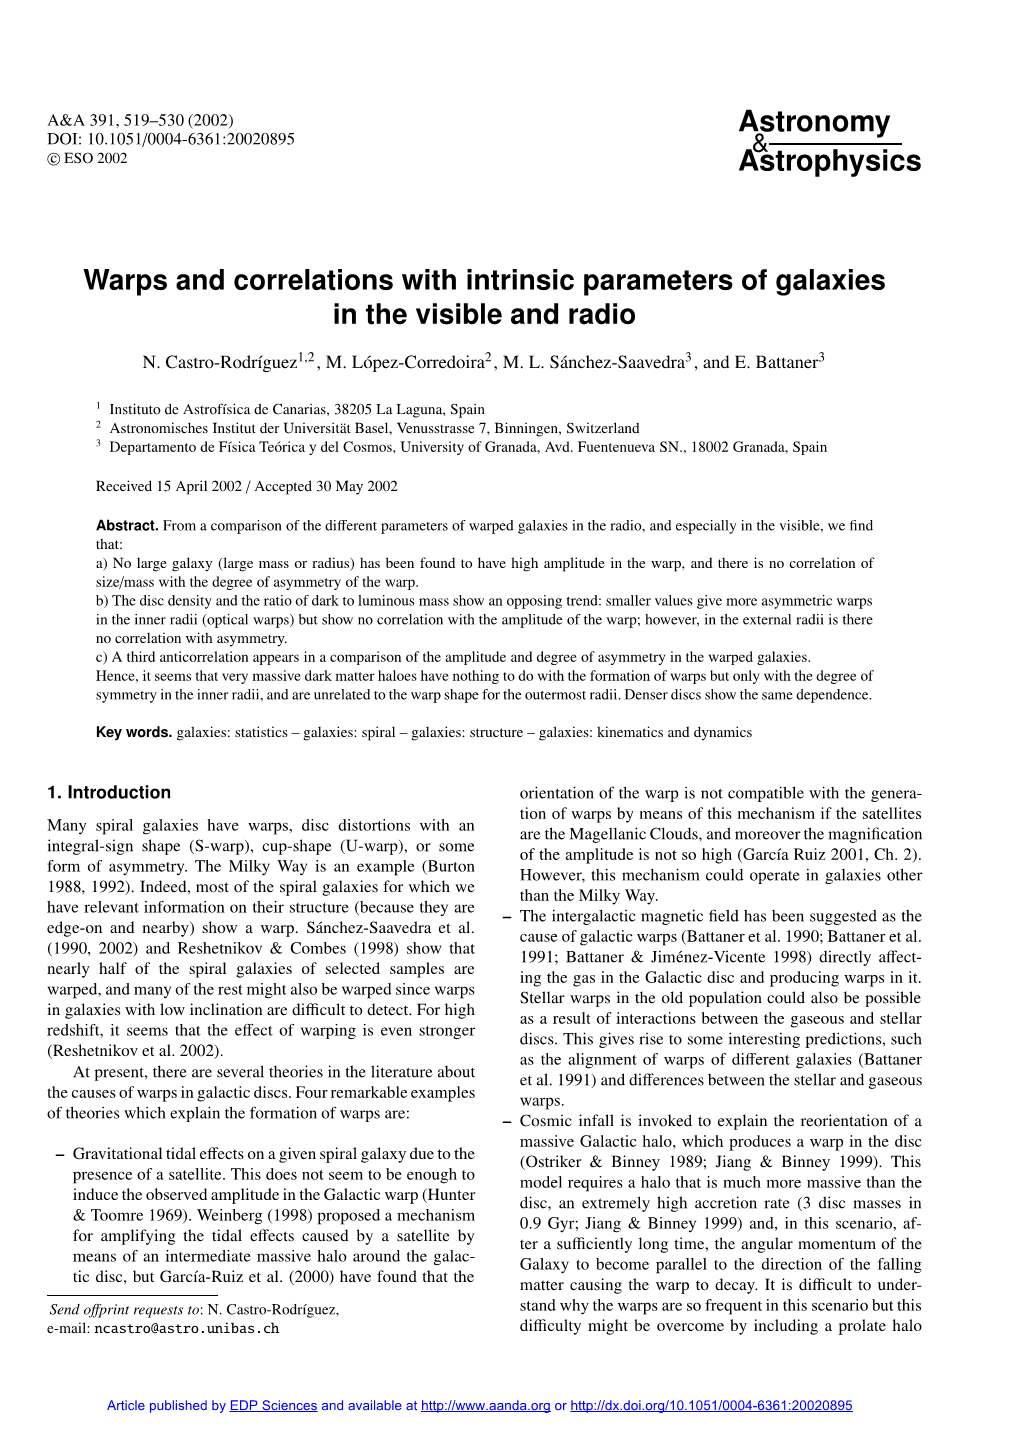 Warps and Correlations with Intrinsic Parameters of Galaxies in the Visible and Radio